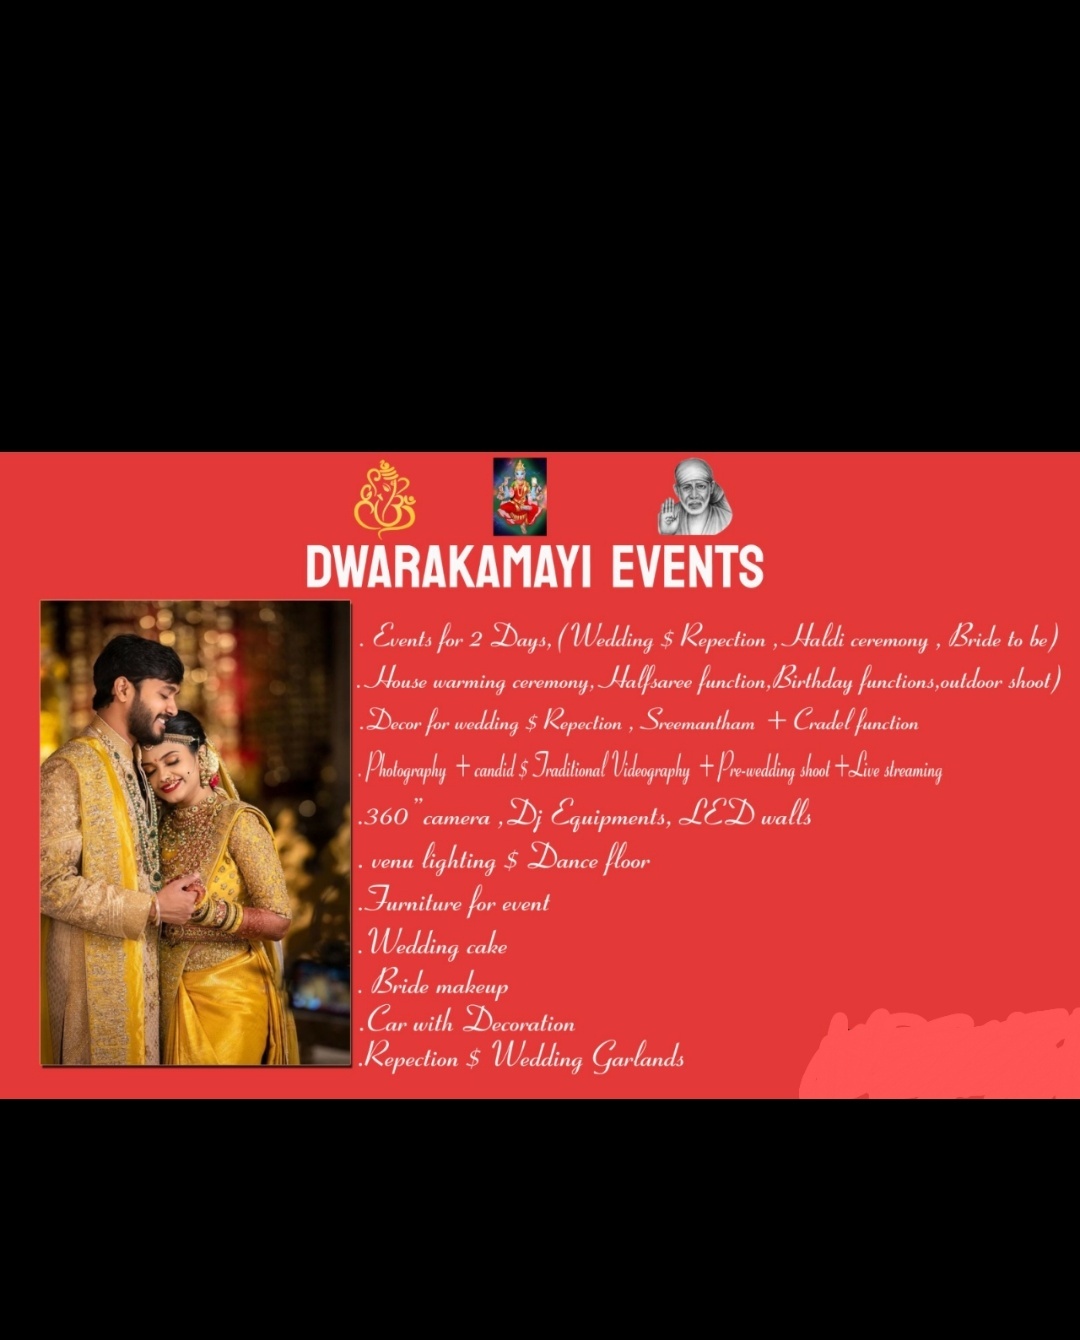 Mehndi Artist, Events/ Catering; Exp: Some experience (0-1 years)